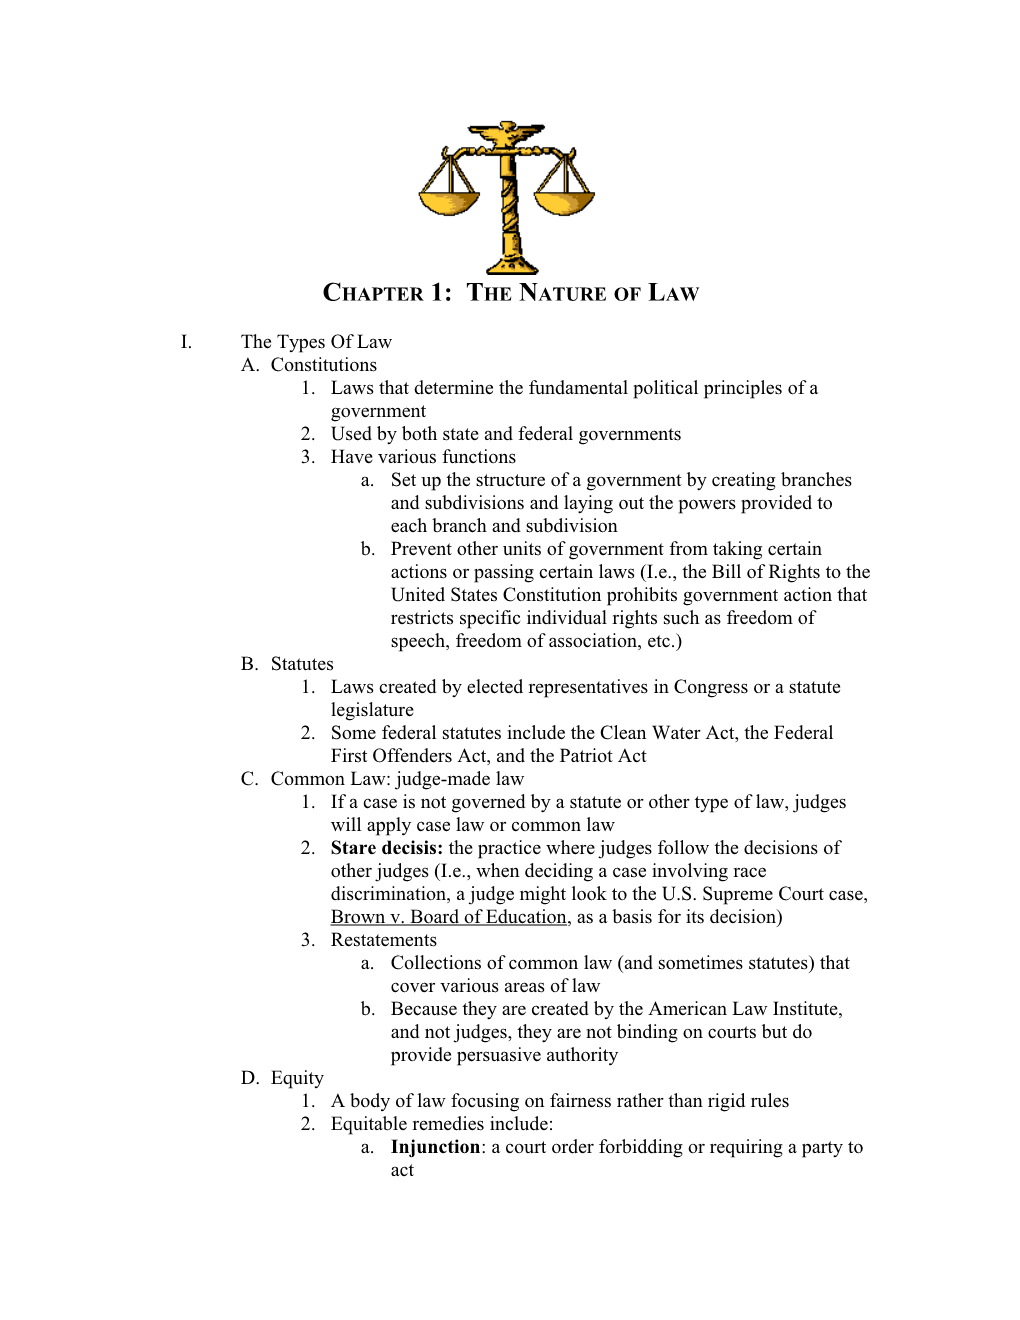 Chapter 1: the Nature of Law